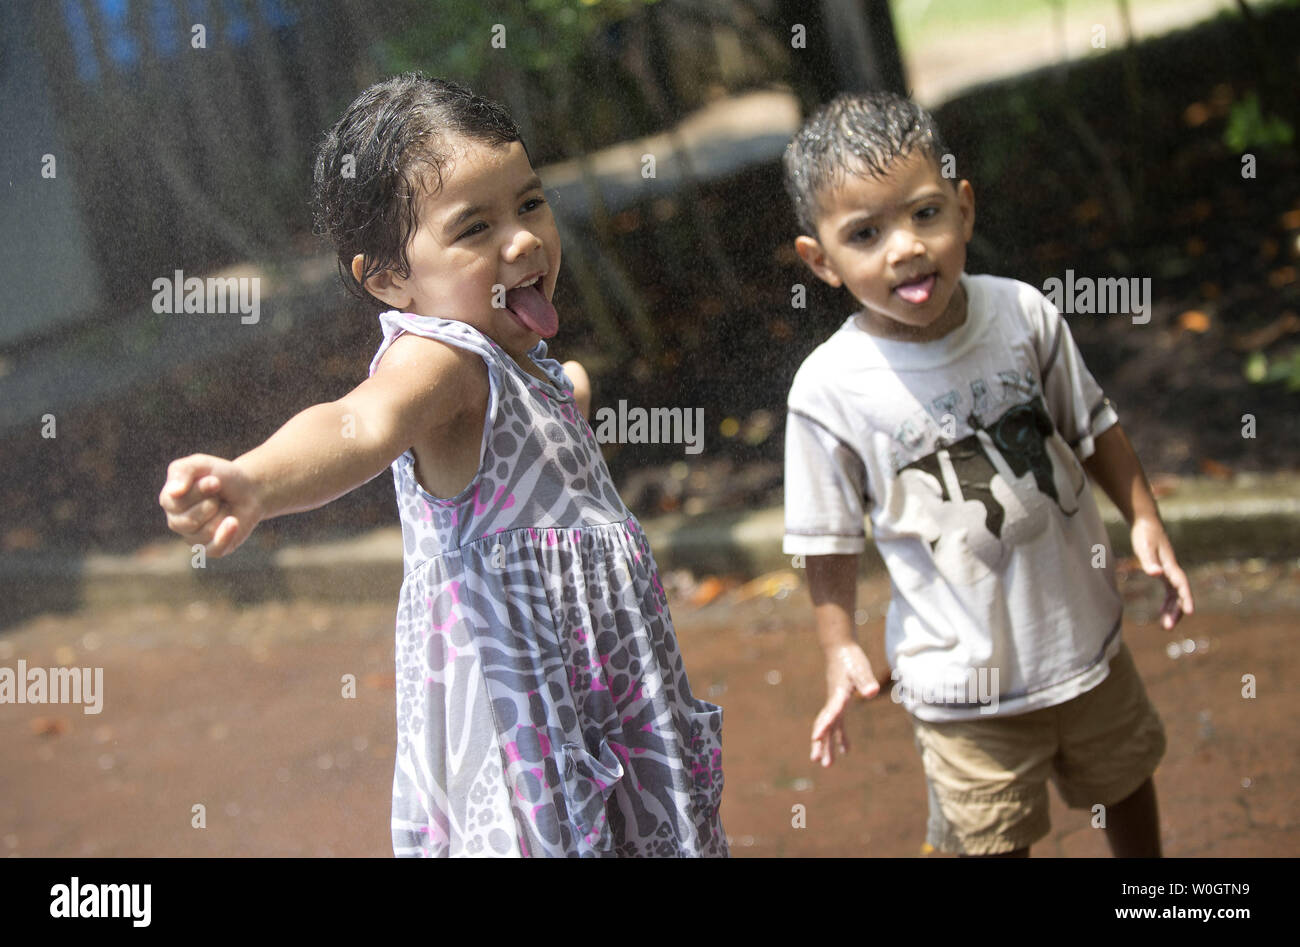 Sarah Rodas, 4, and her brother Nester, 2, sister cool off from the oppressive heat in a mister at the National Zoo on June 29, 2012 in Washington, D.C. Temperatures are expected to hover around 100 degrees through the weekend.  UPI/Kevin Dietsch Stock Photo